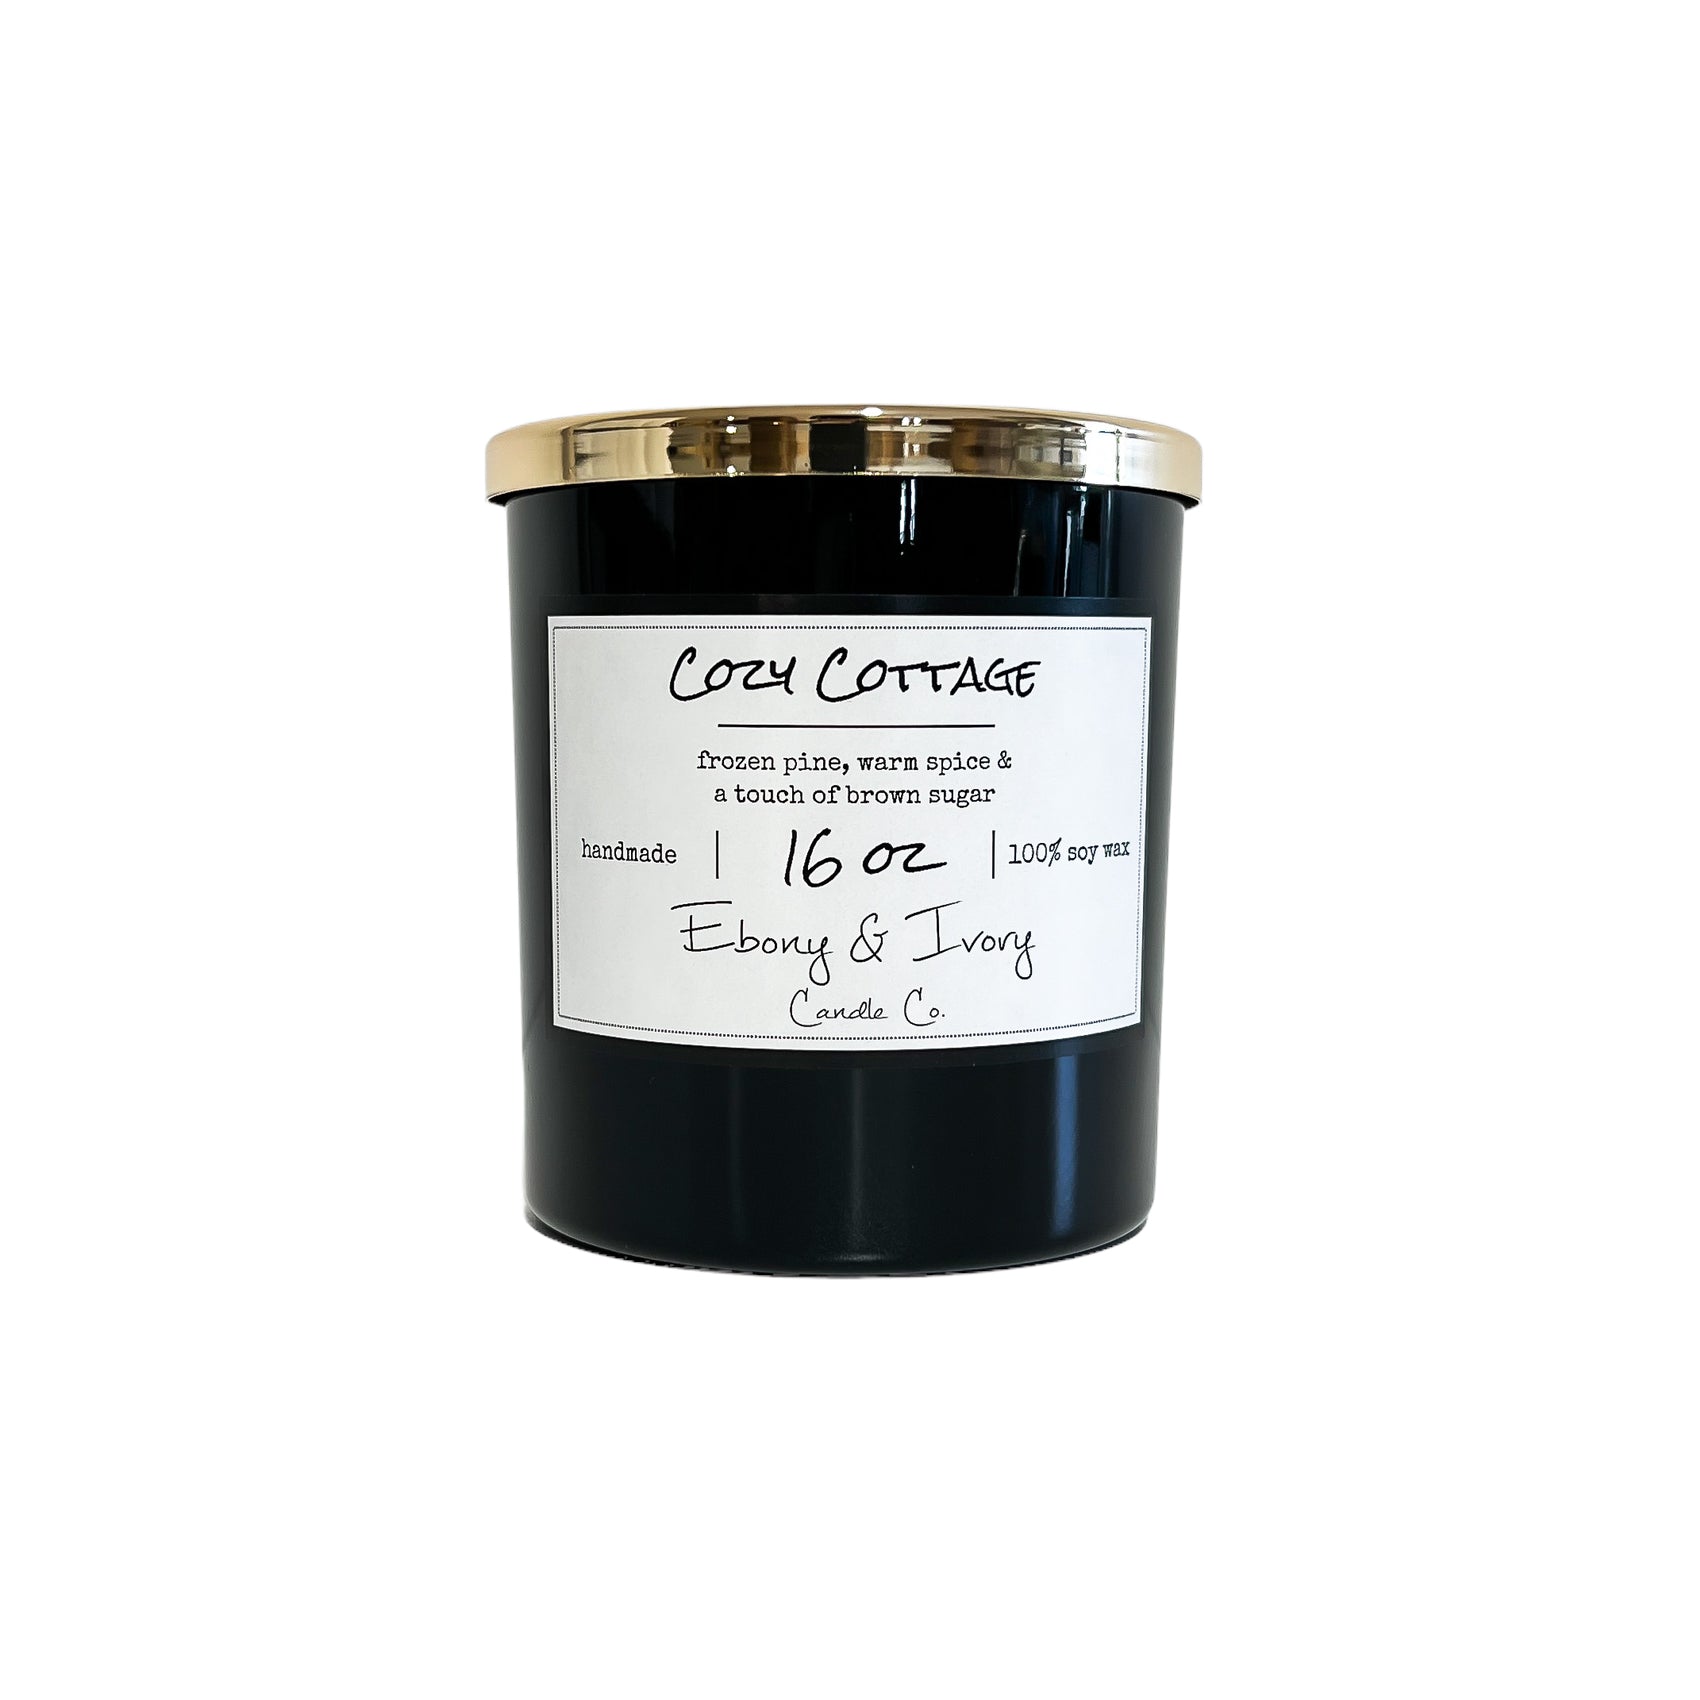 Black, sixteen ounces, frozen pine, warm spice, and brown sugar scented soy wax candle with a gold lid and a white label that reads Cozy Cottage